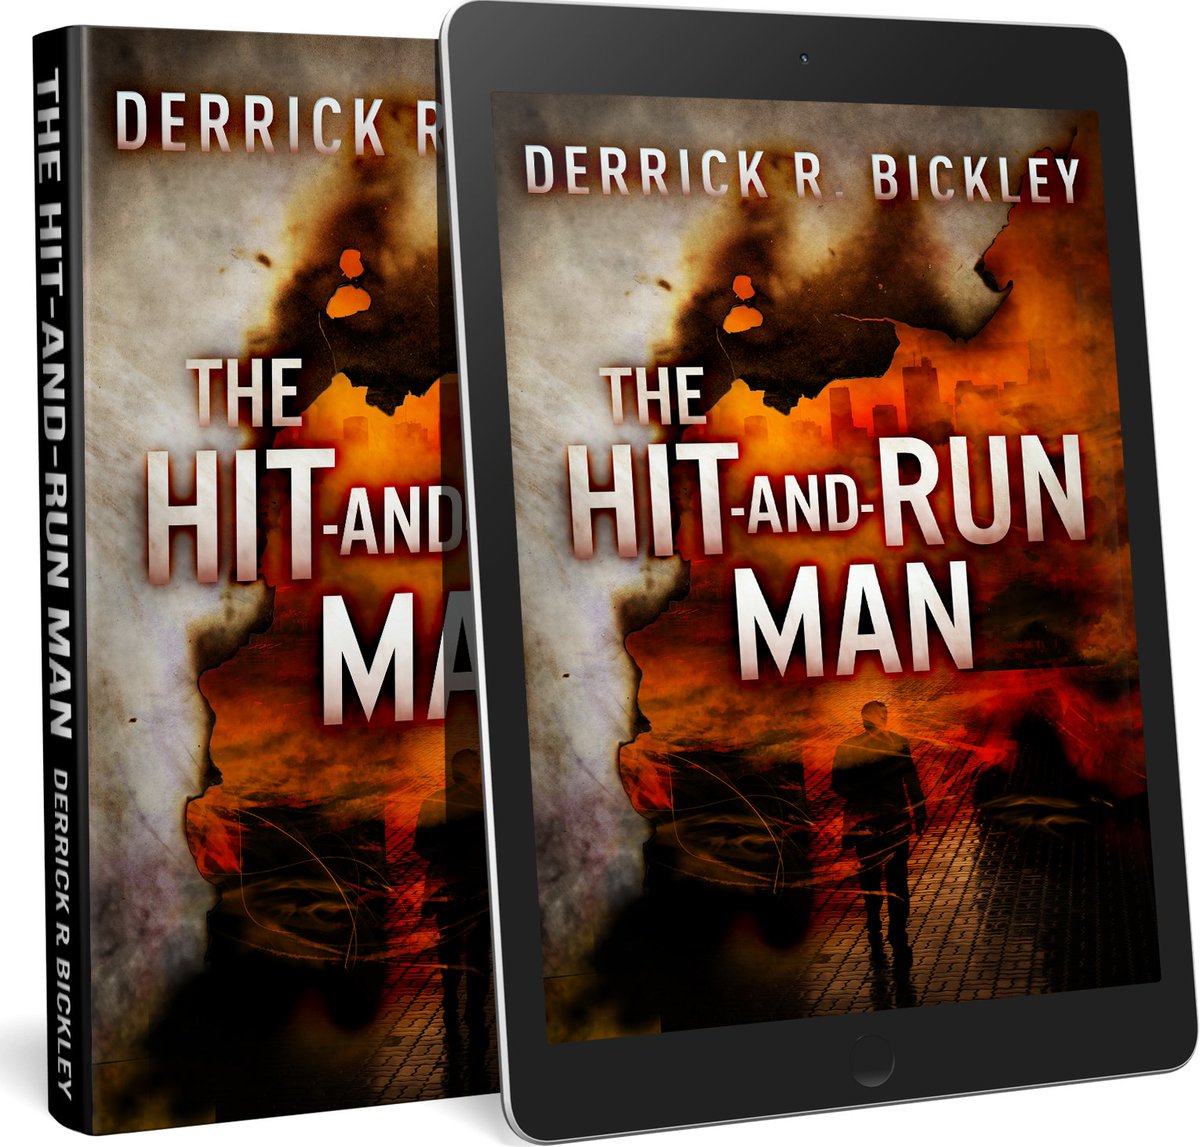 'Tough, all-action thriller all about choices' FIVE/FOUR star reader-acclaimed mybook.to/TheHitAndRunMan THE HIT-AND-RUN MAN at #Kindle or your favourite digital store in PAPERBACK HARDBACK (Amzn inc L/Print B&N inc L/Print Wmart) and AUDIOBOOK #crimethrillers #mustread #crime